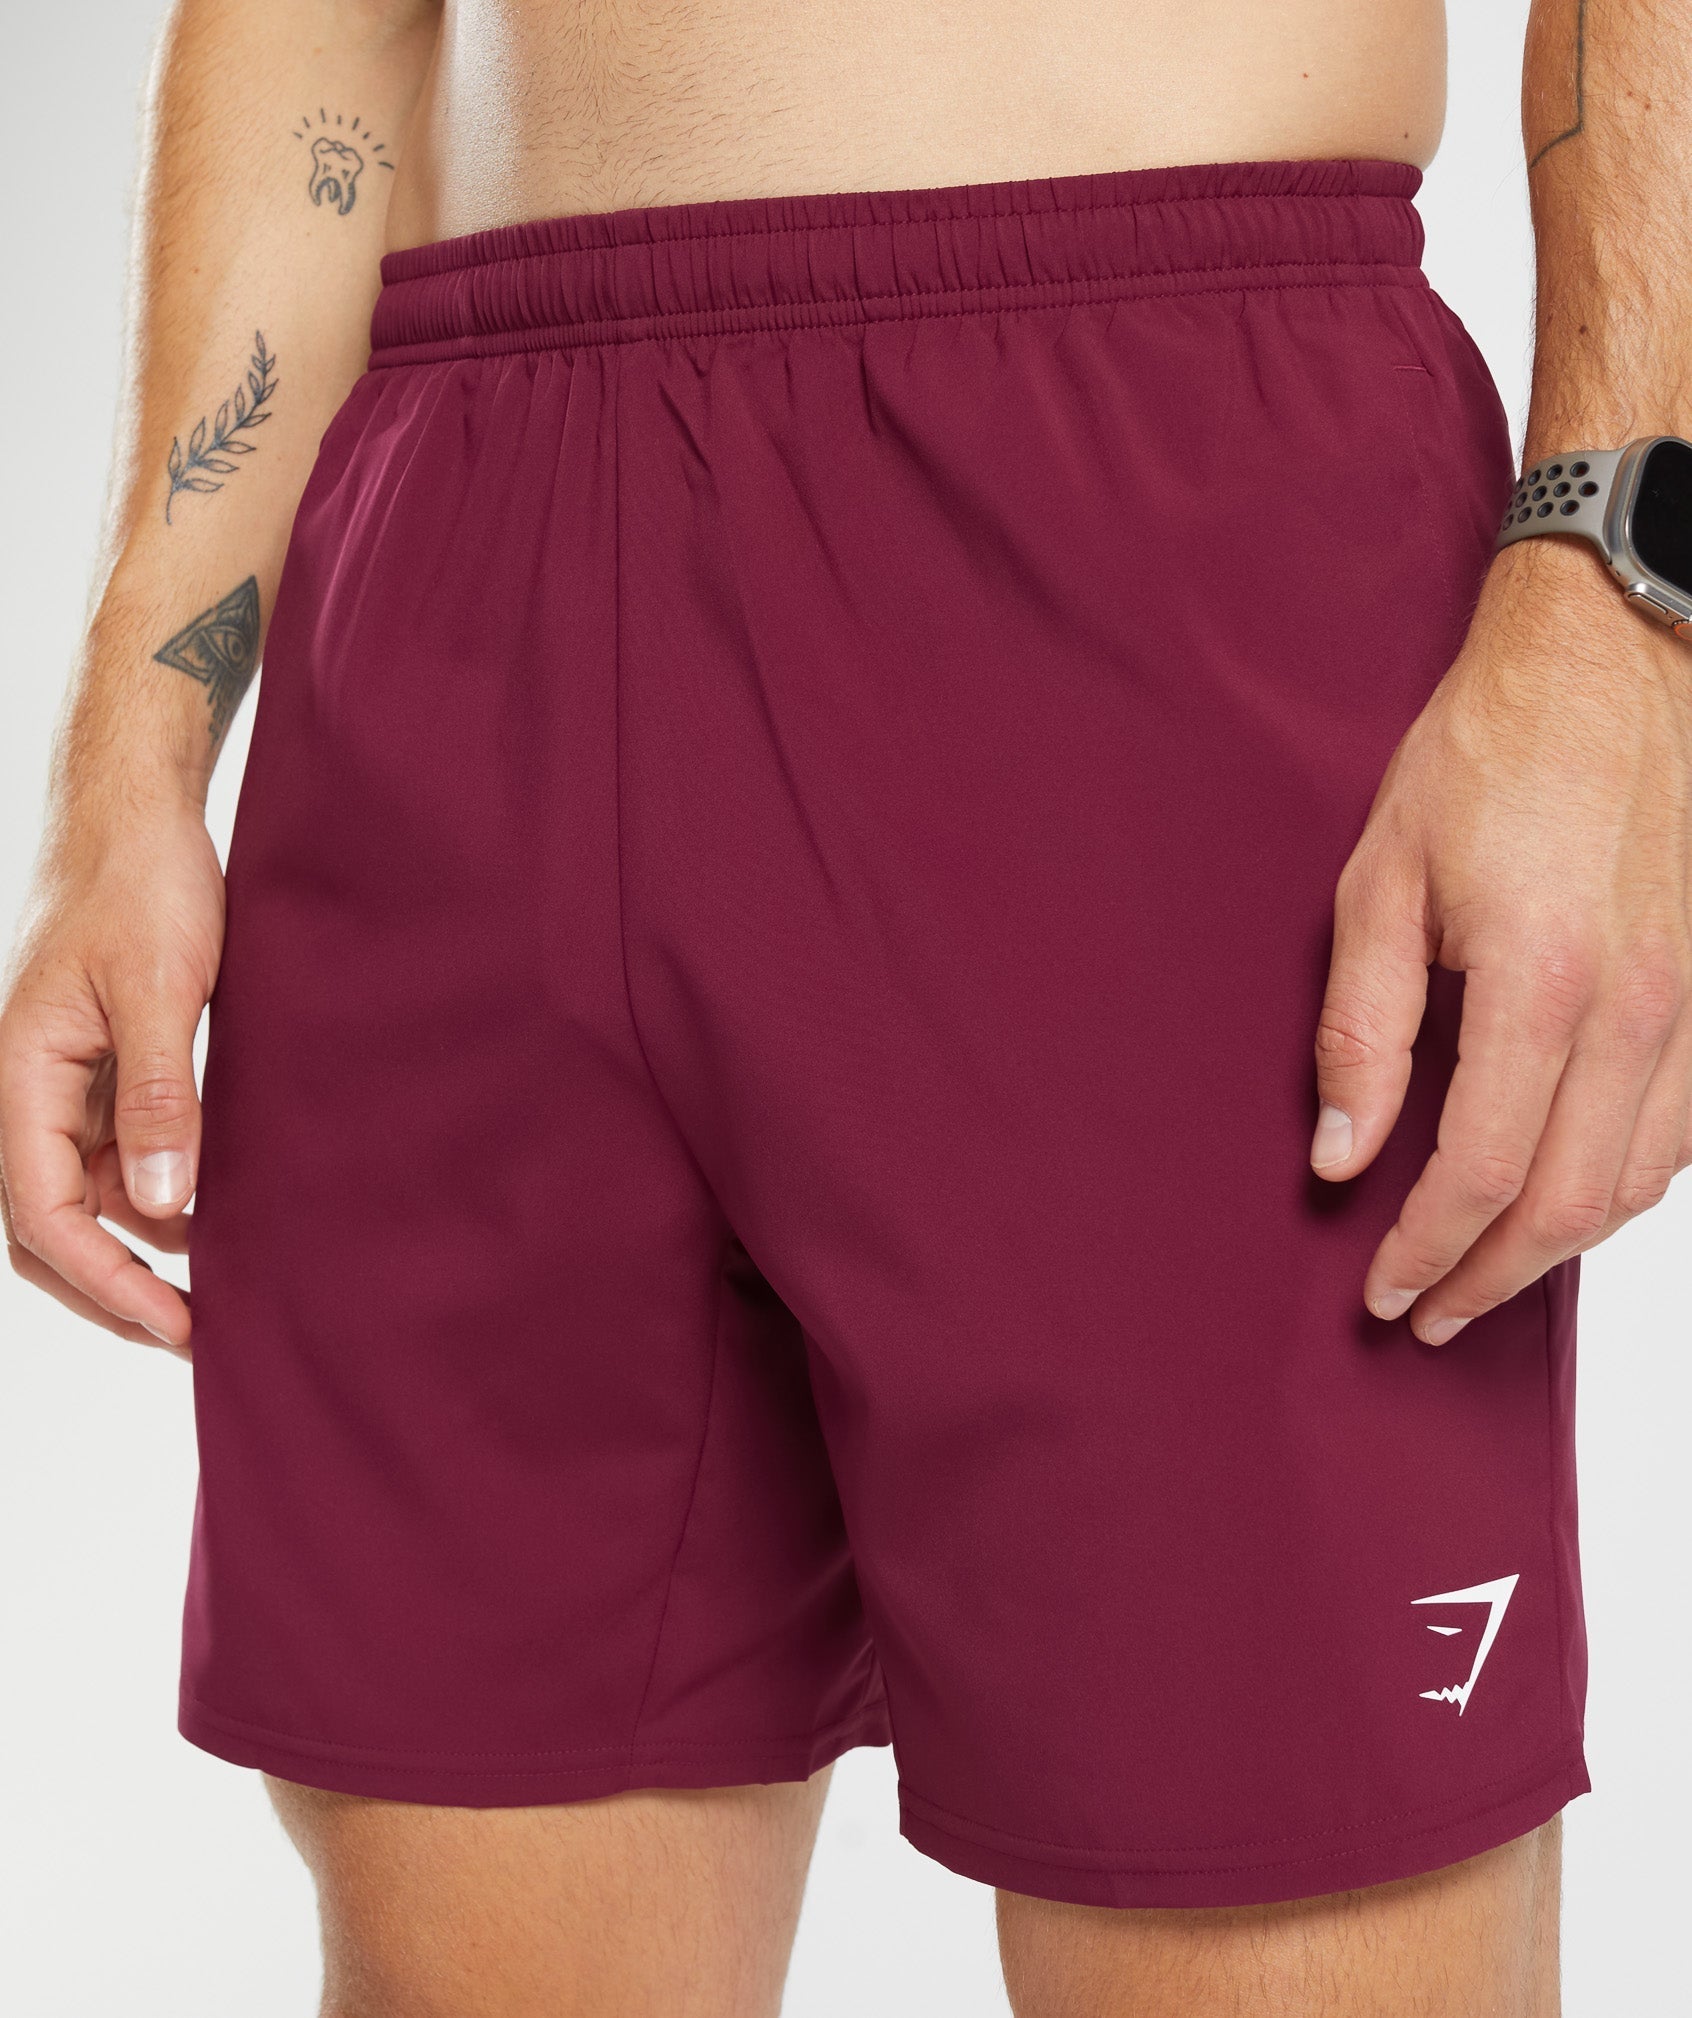 Arrival 7" Shorts in Plum Pink - view 5